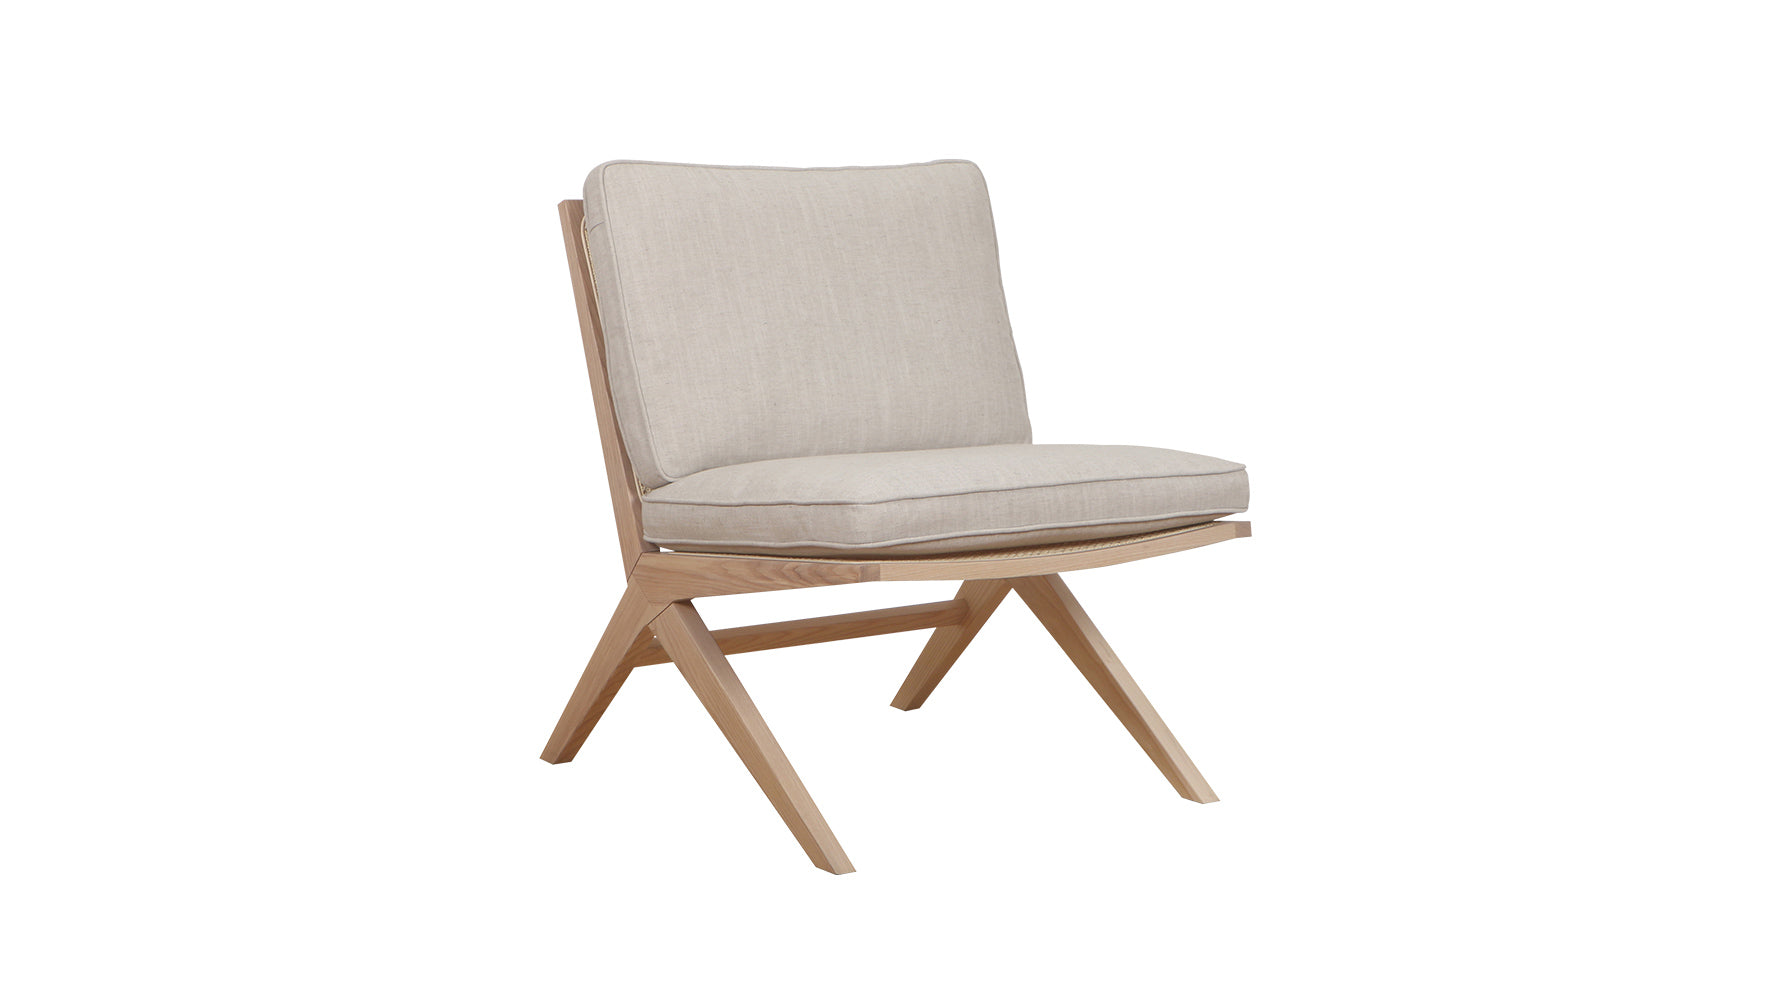 Endless Summer Lounge Chair with Cushion, White Ash/Natural Fabric - Image 3